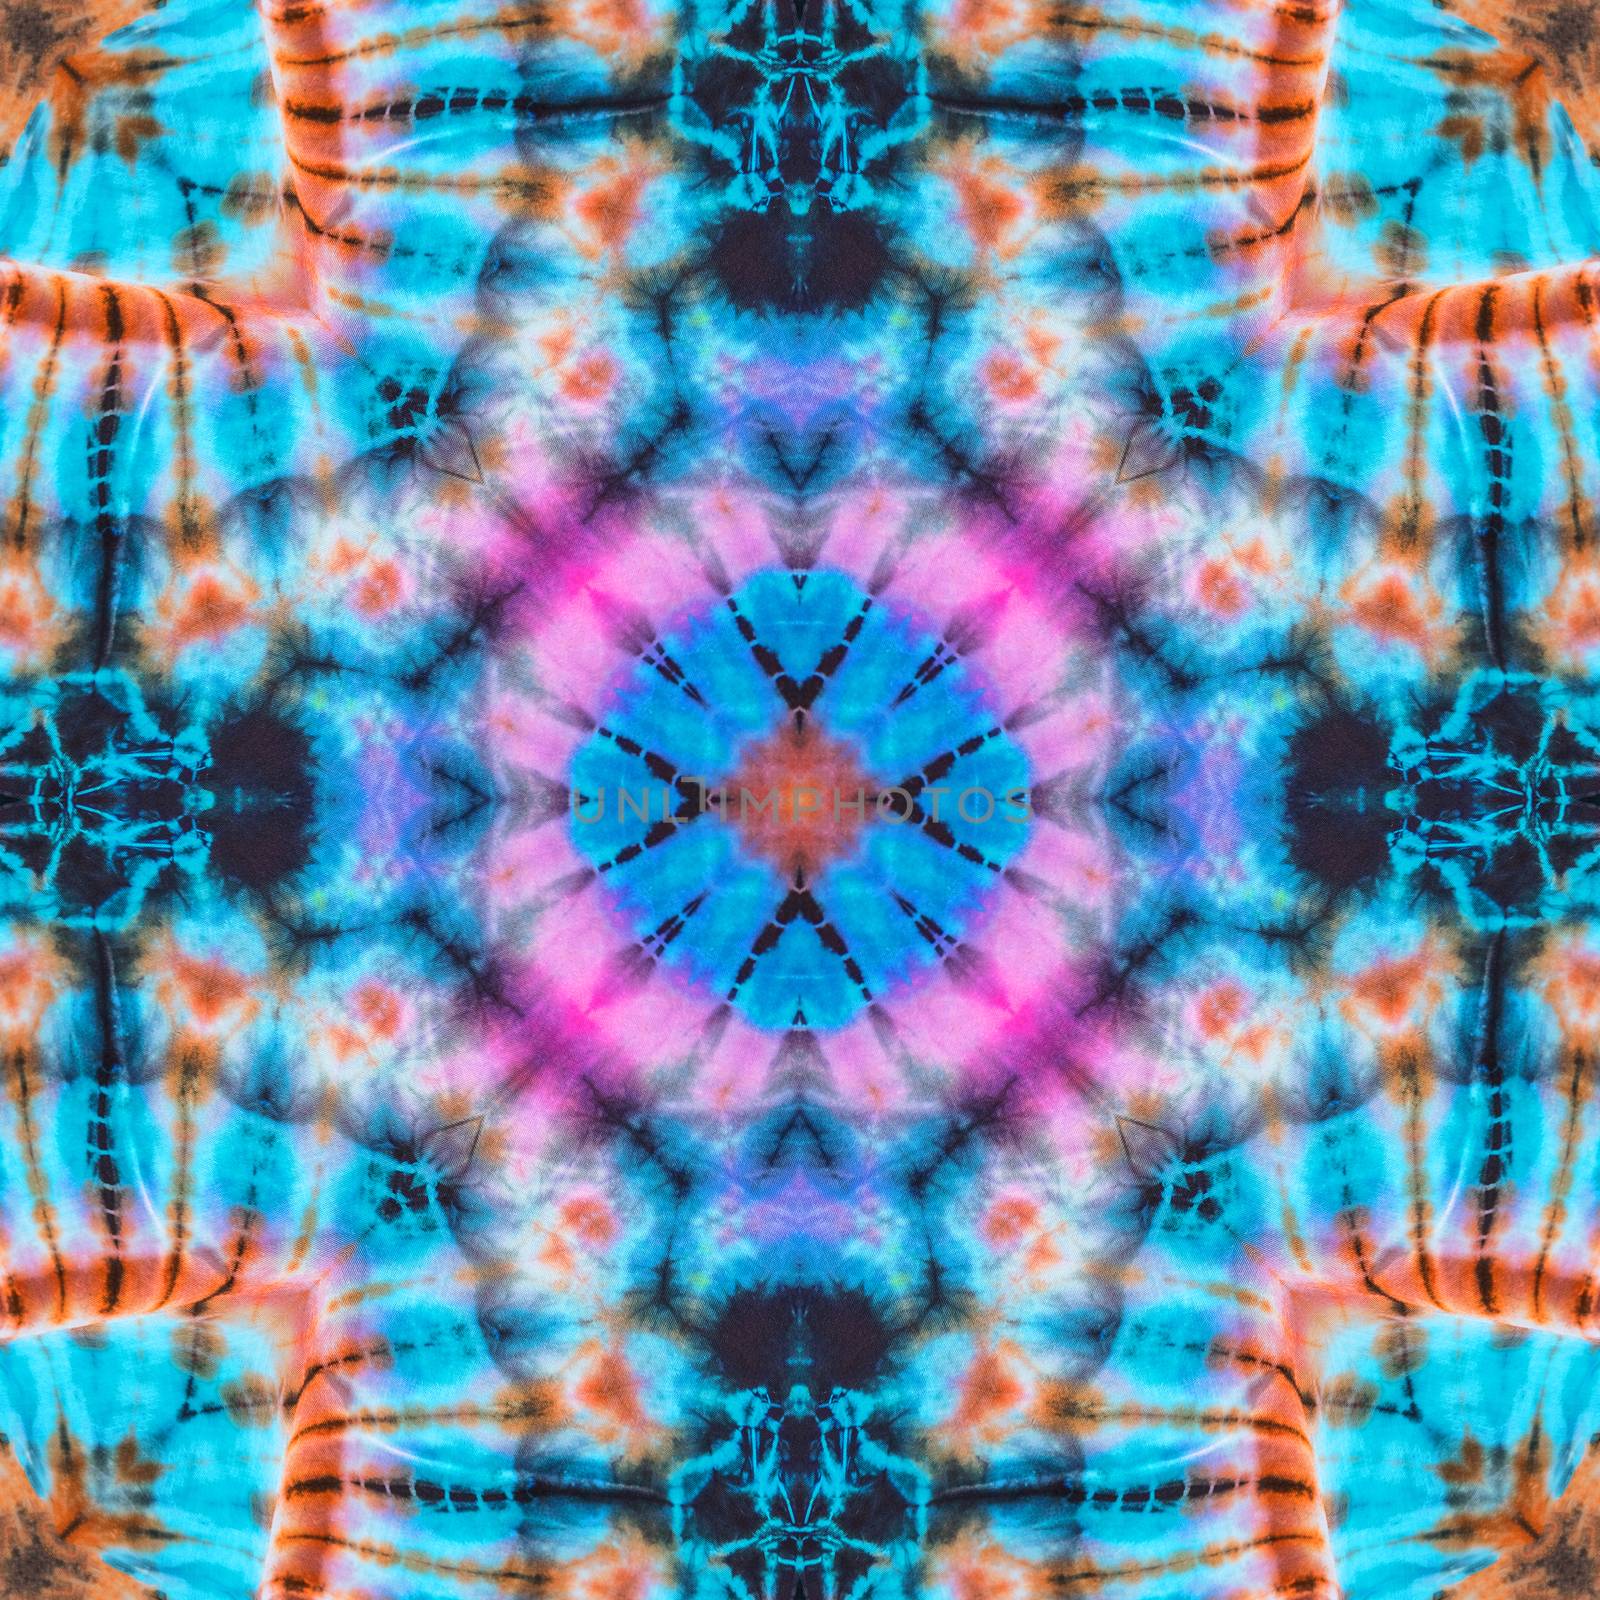 Abstract kaleidoscope or endless pattern for background used.